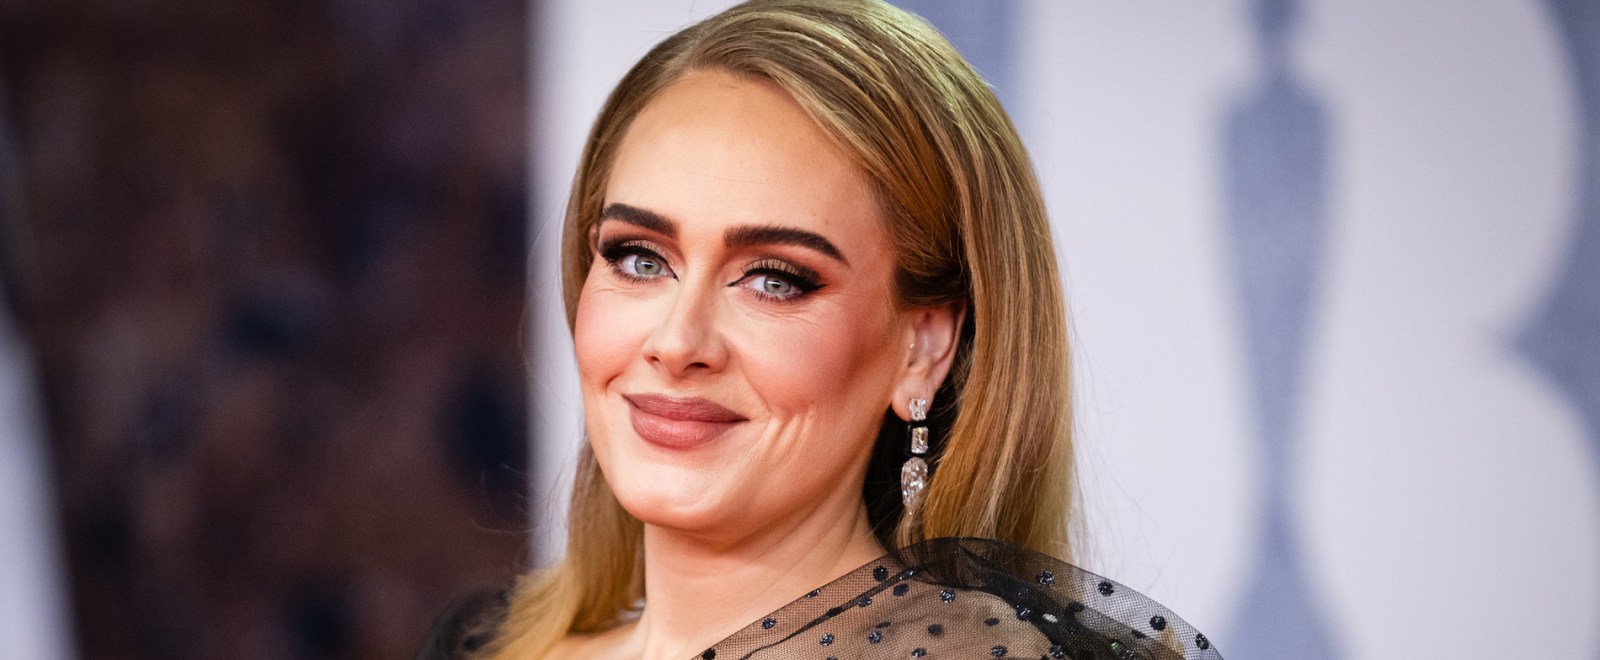 Adele reveals what she had hoped to be before finding fame